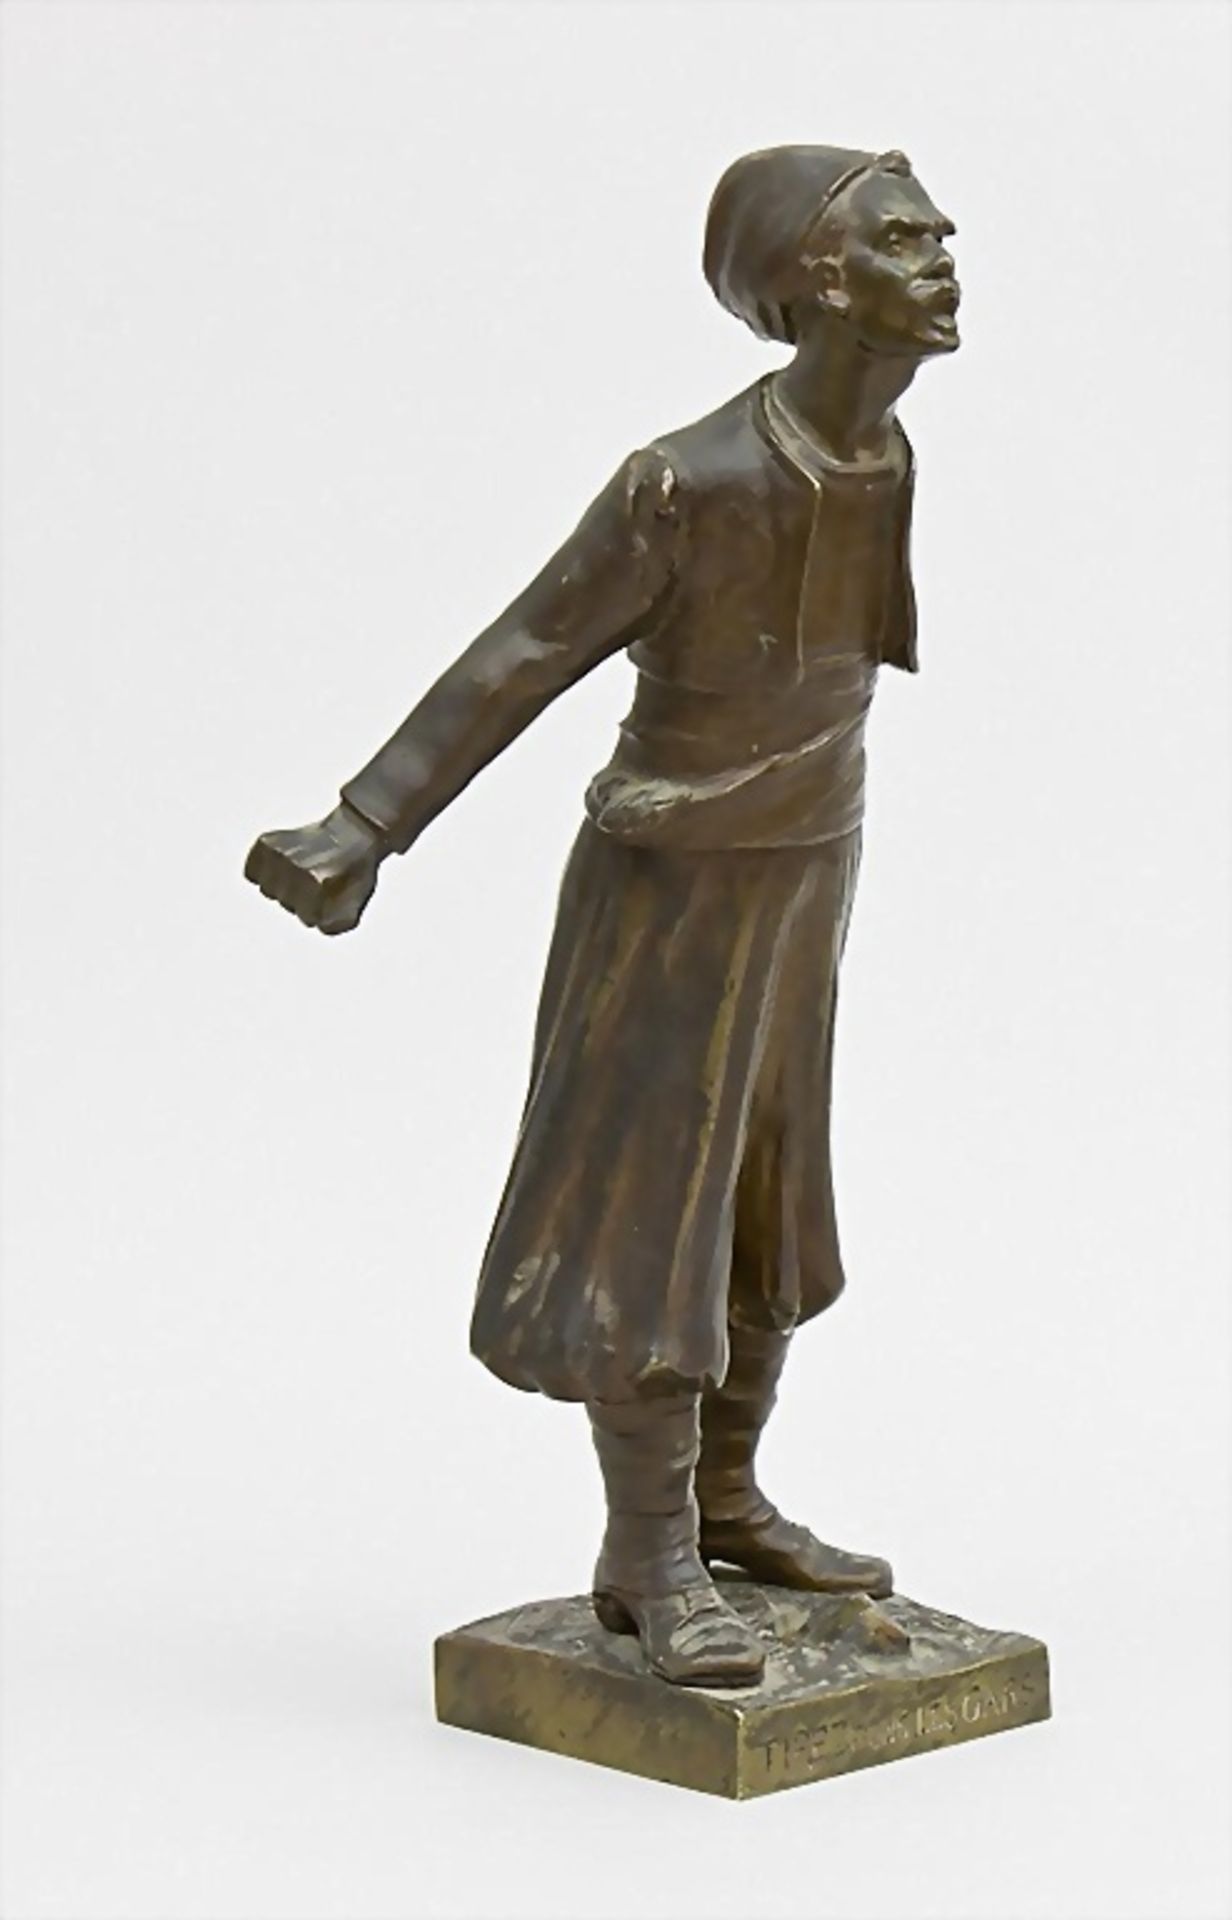 Orientale/Bronze Sculpture Of A Shouting Oriental Man, Georges Flamand, um 1900 - Image 2 of 5